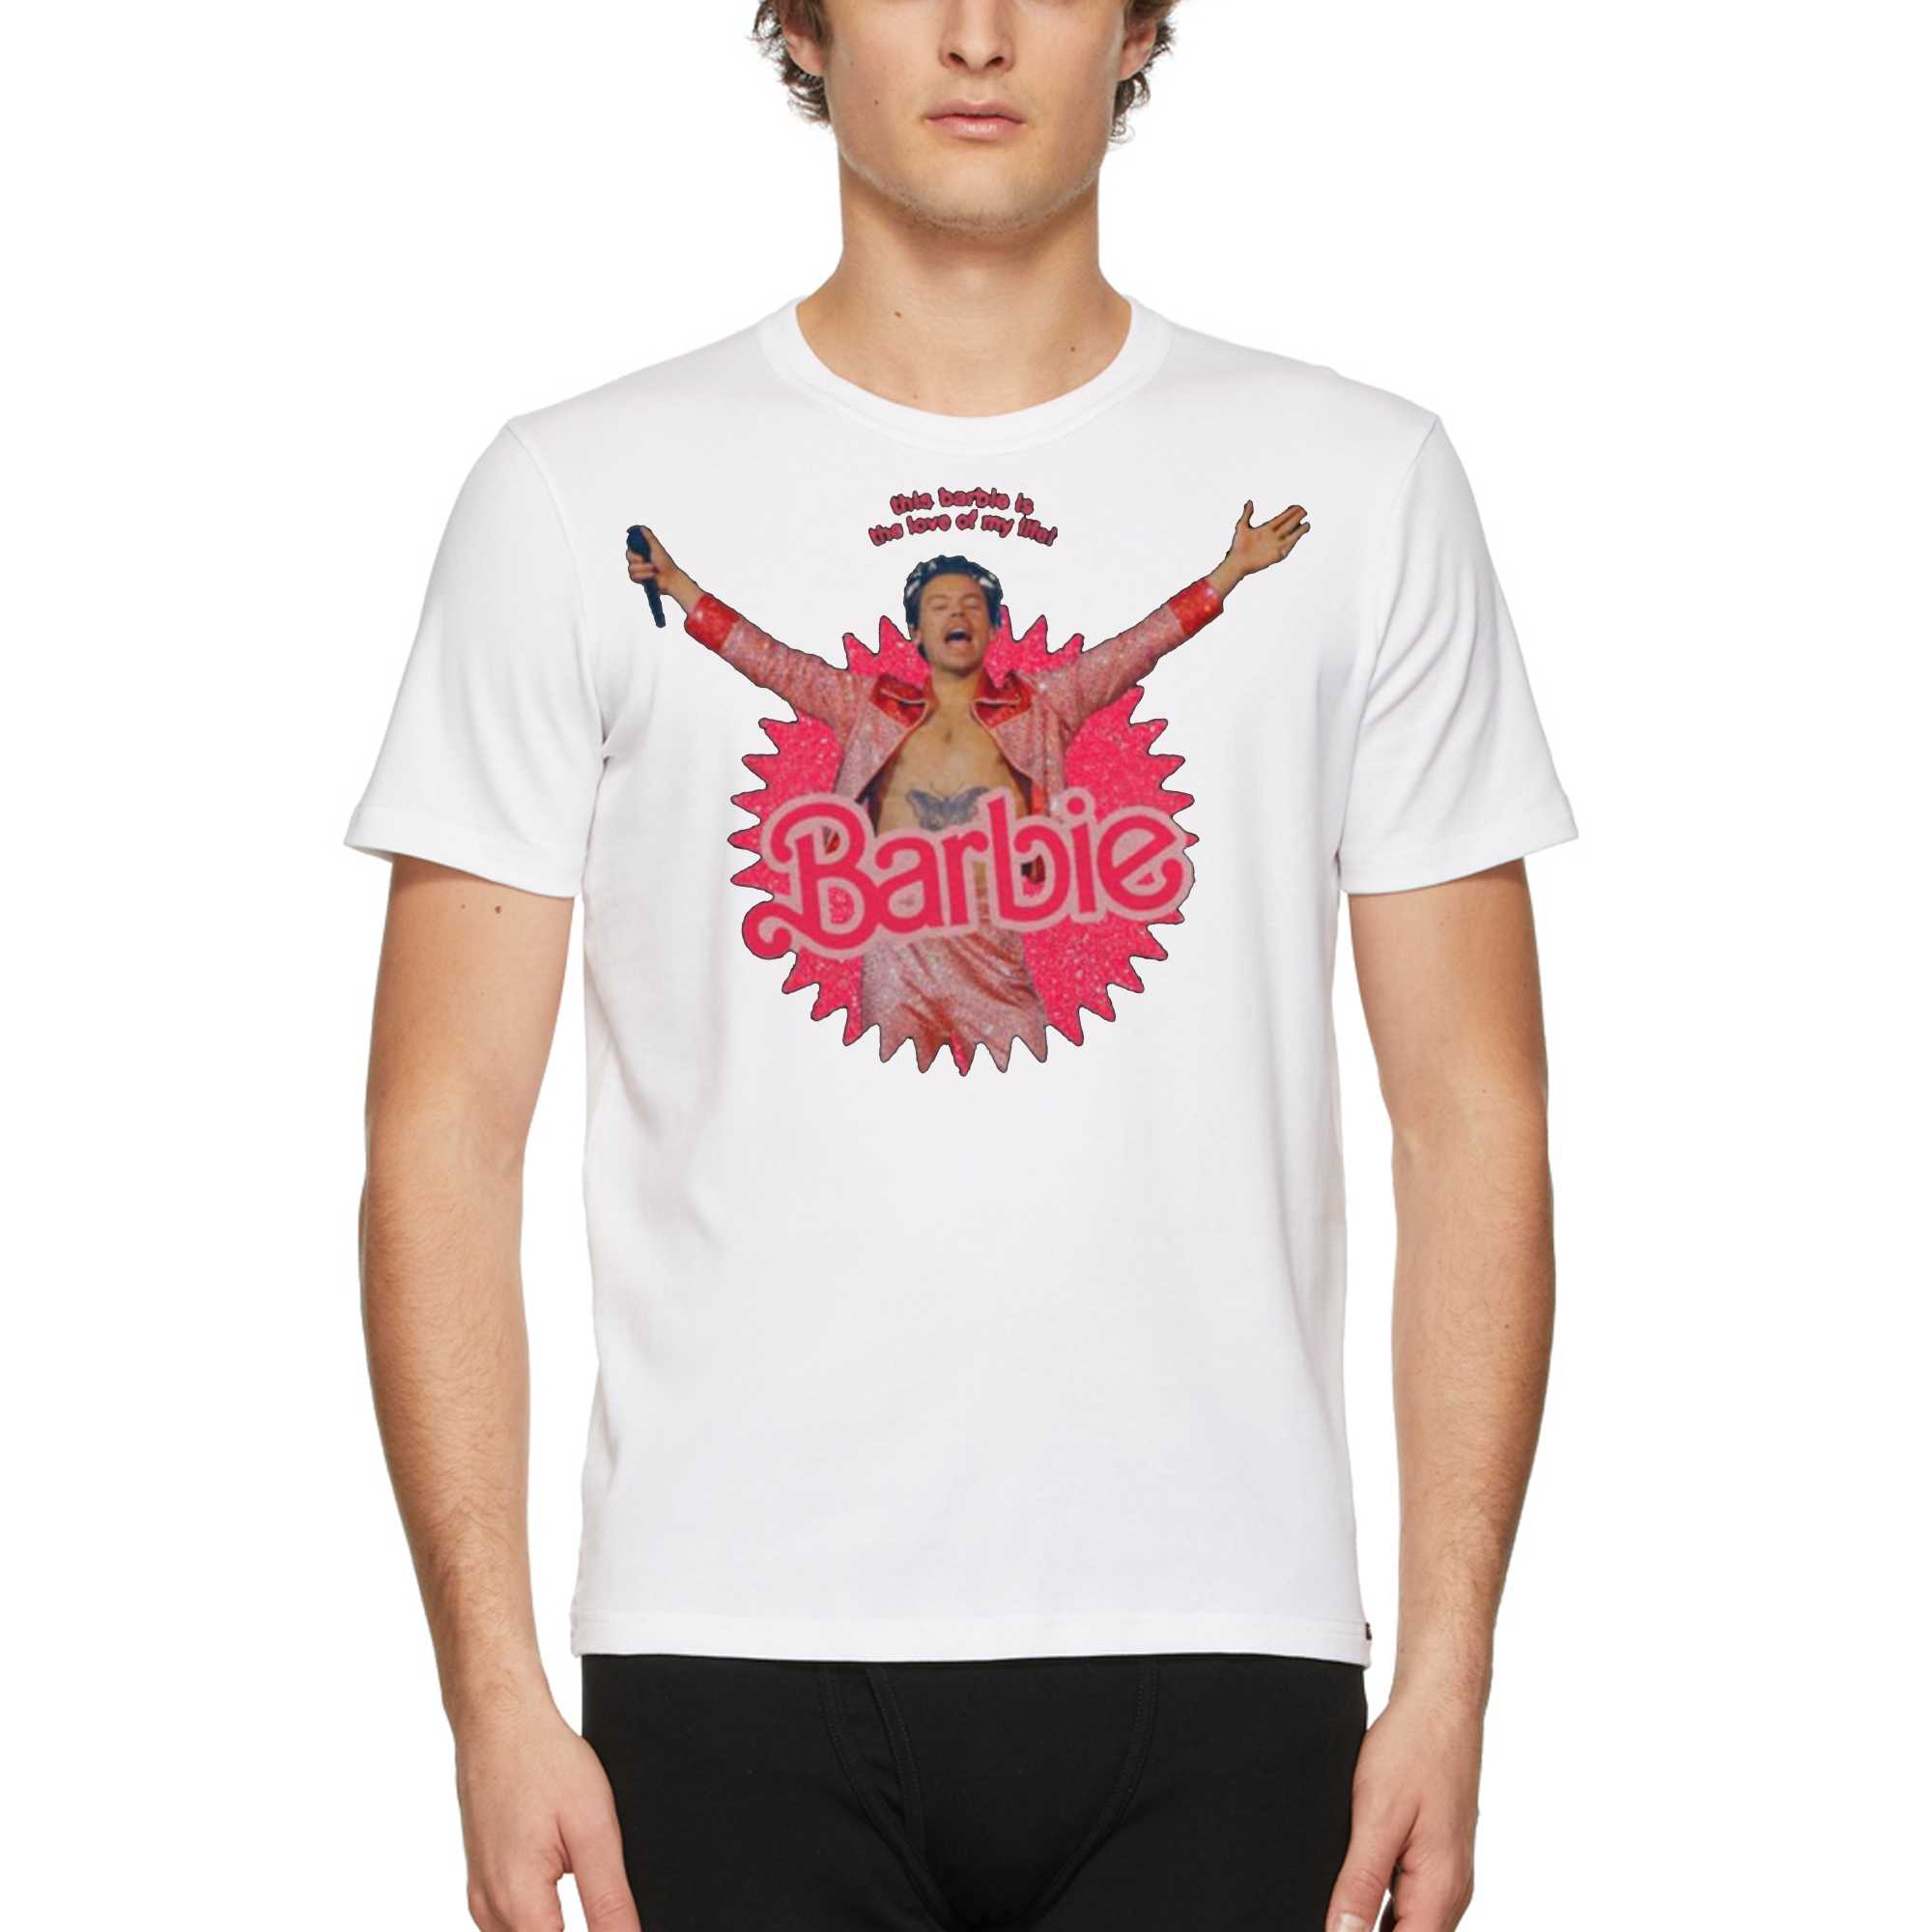 This Barbie Is The Love Of My Life Harry Shirt - Shibtee Clothing